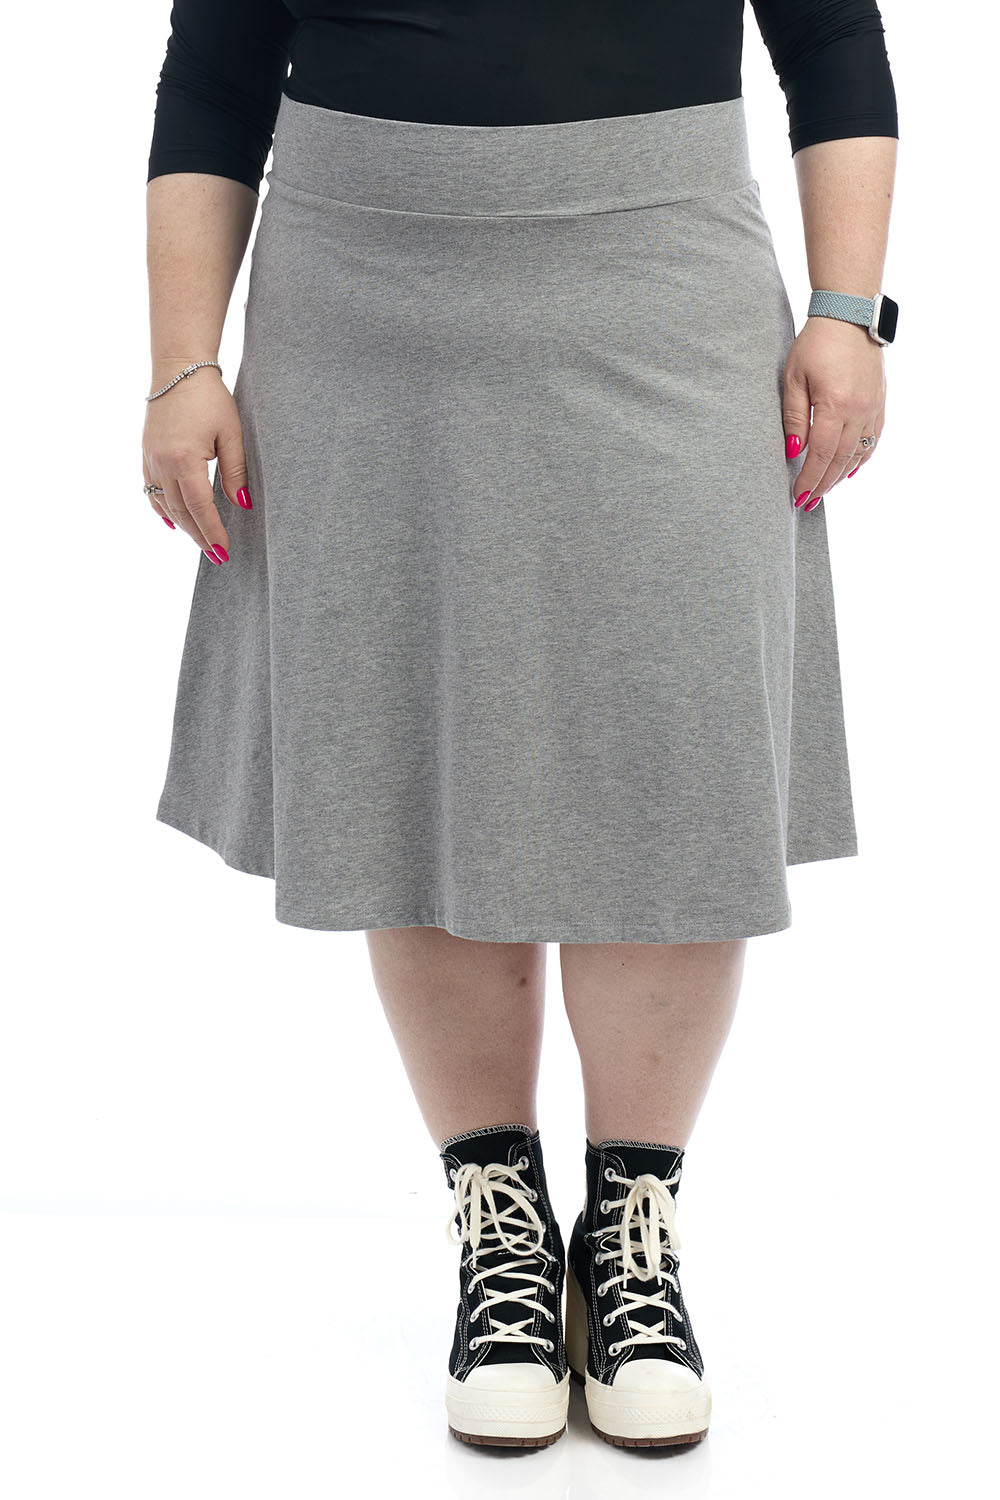 25 inch plus size heather grey a-line below knee length cotton skater skirt